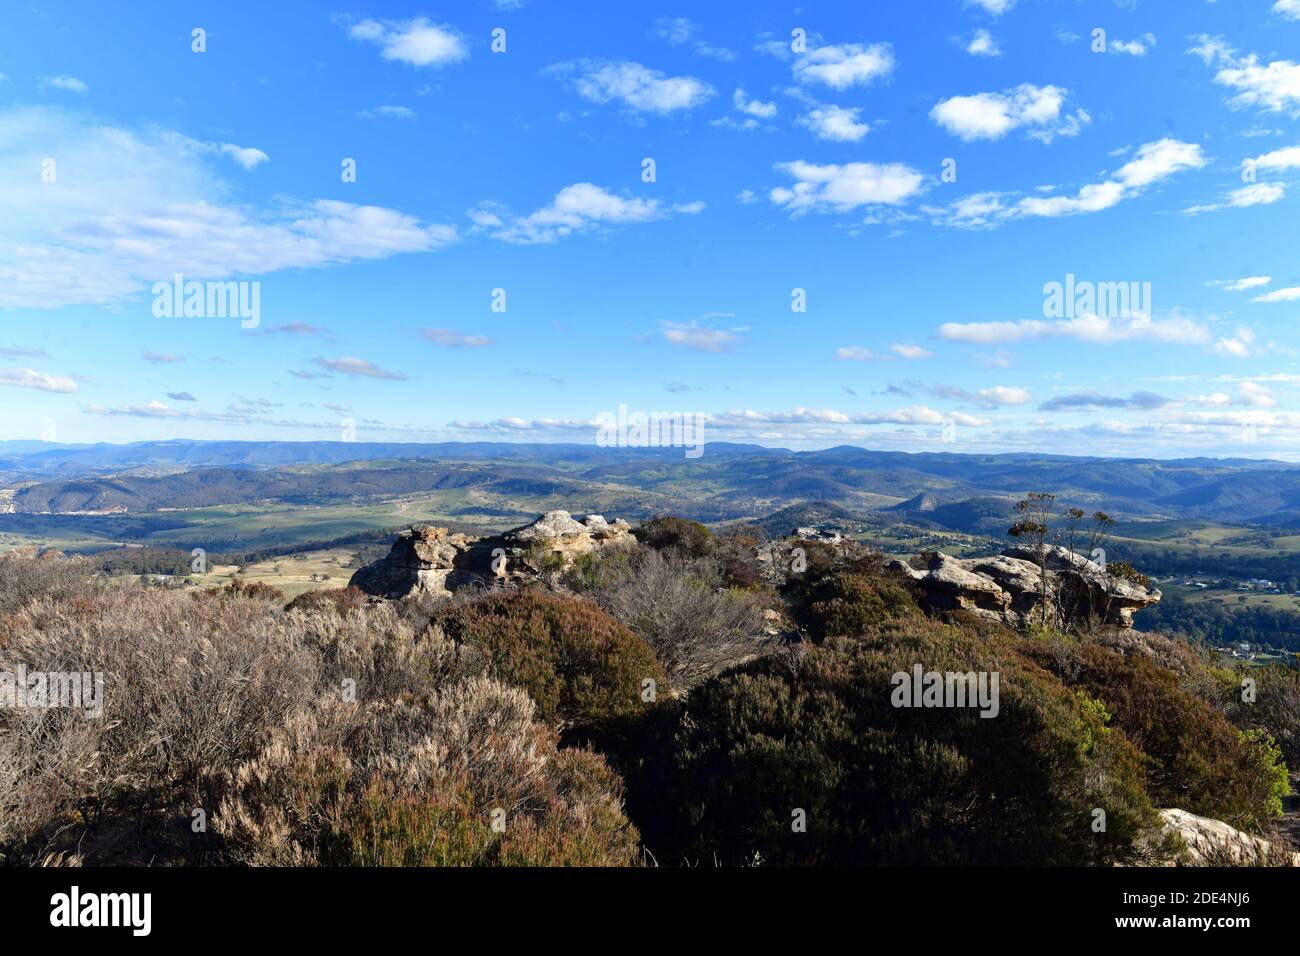 A view of the countryside near Lithgow, Australia Stock Photo